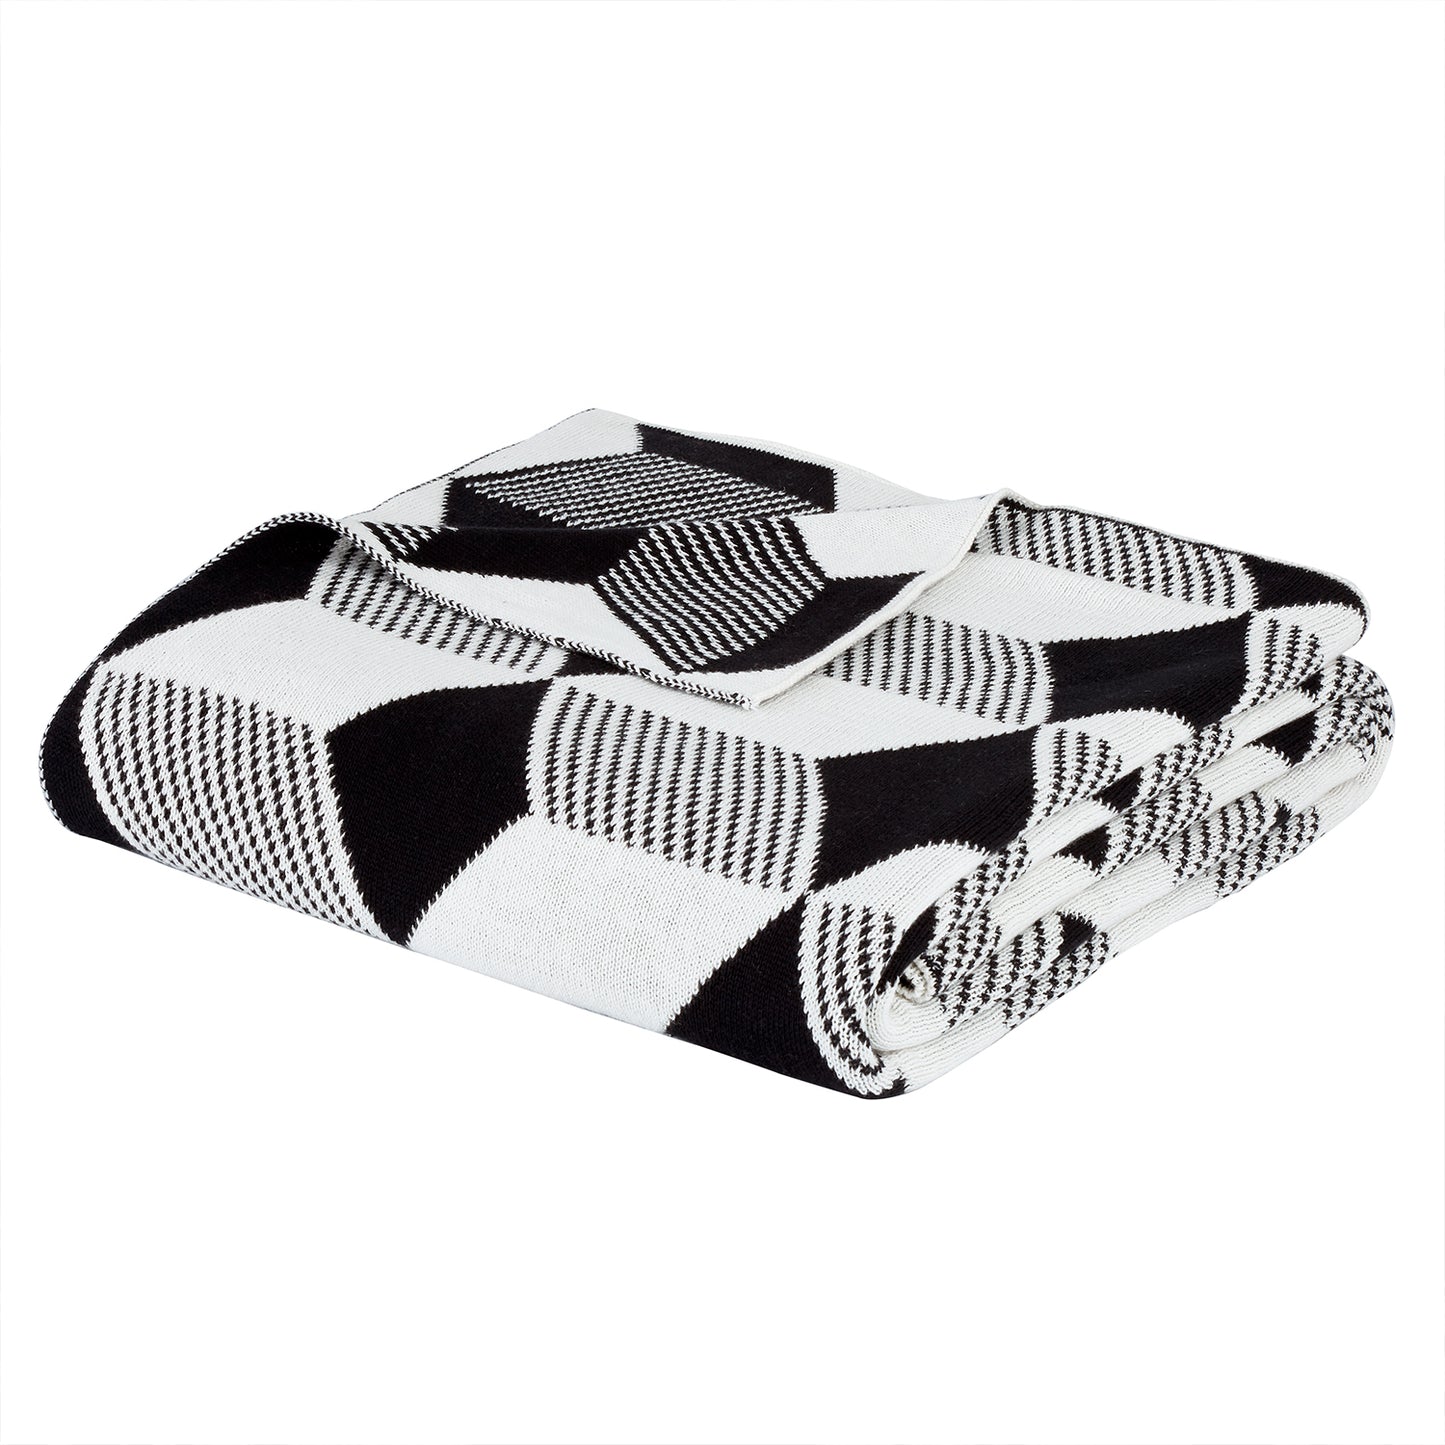 Style Sisters Black Cream Knitted Cube Cotton Blanket Throw (150cm x 180cm)